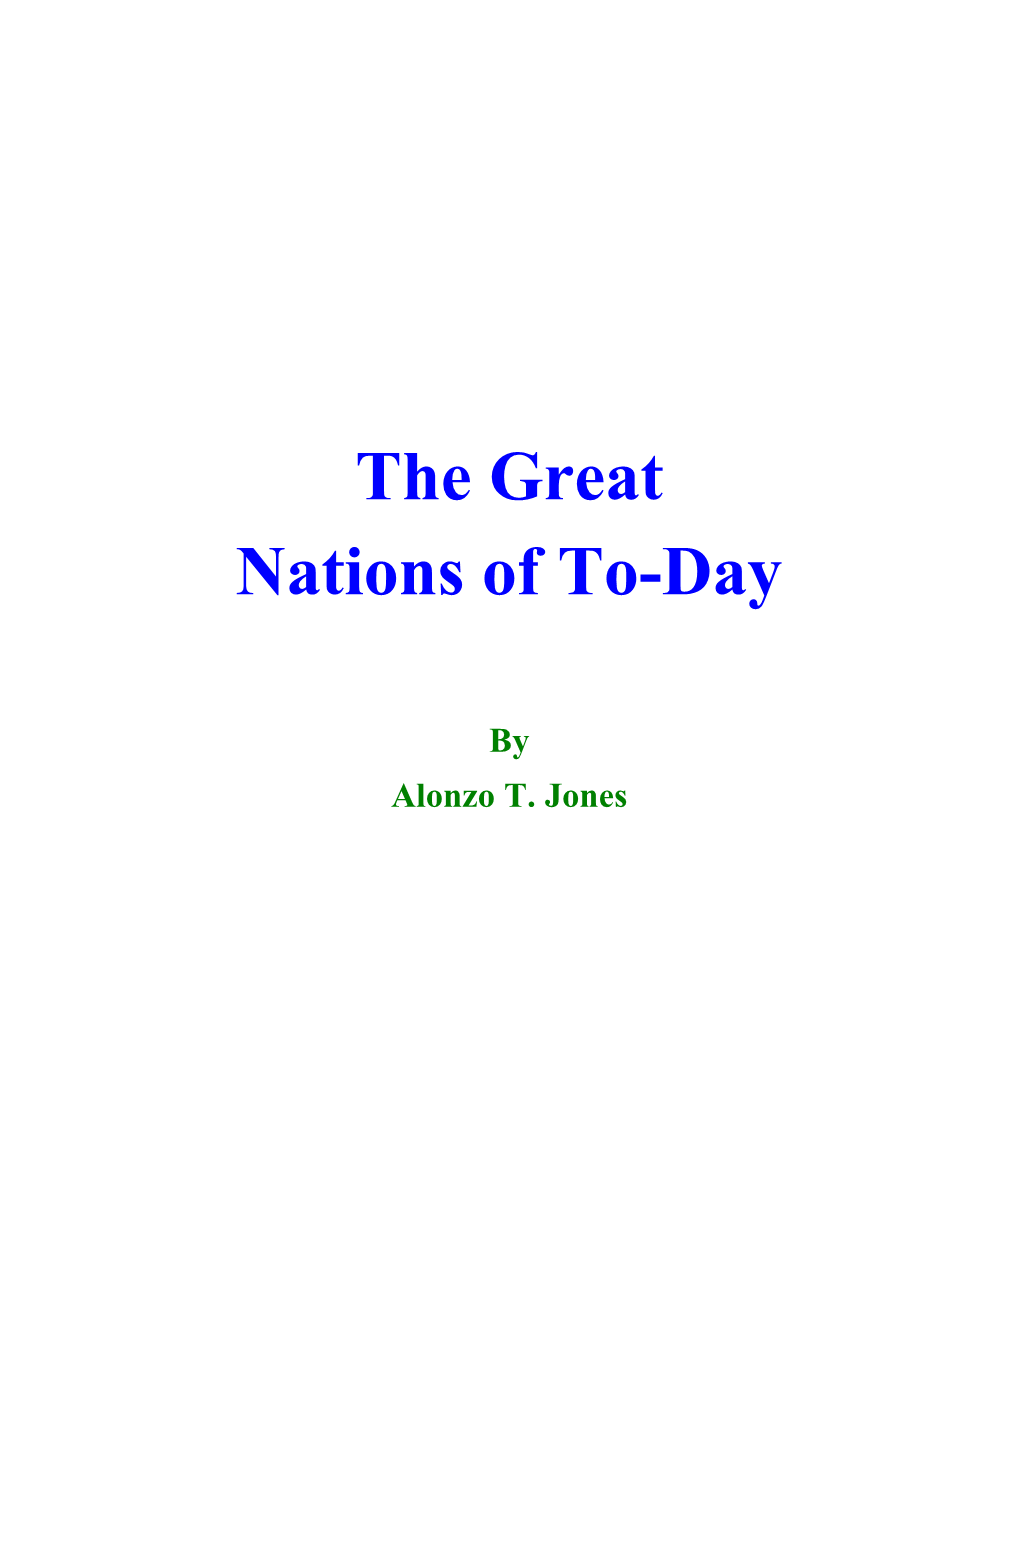 Great Nations of To-Day